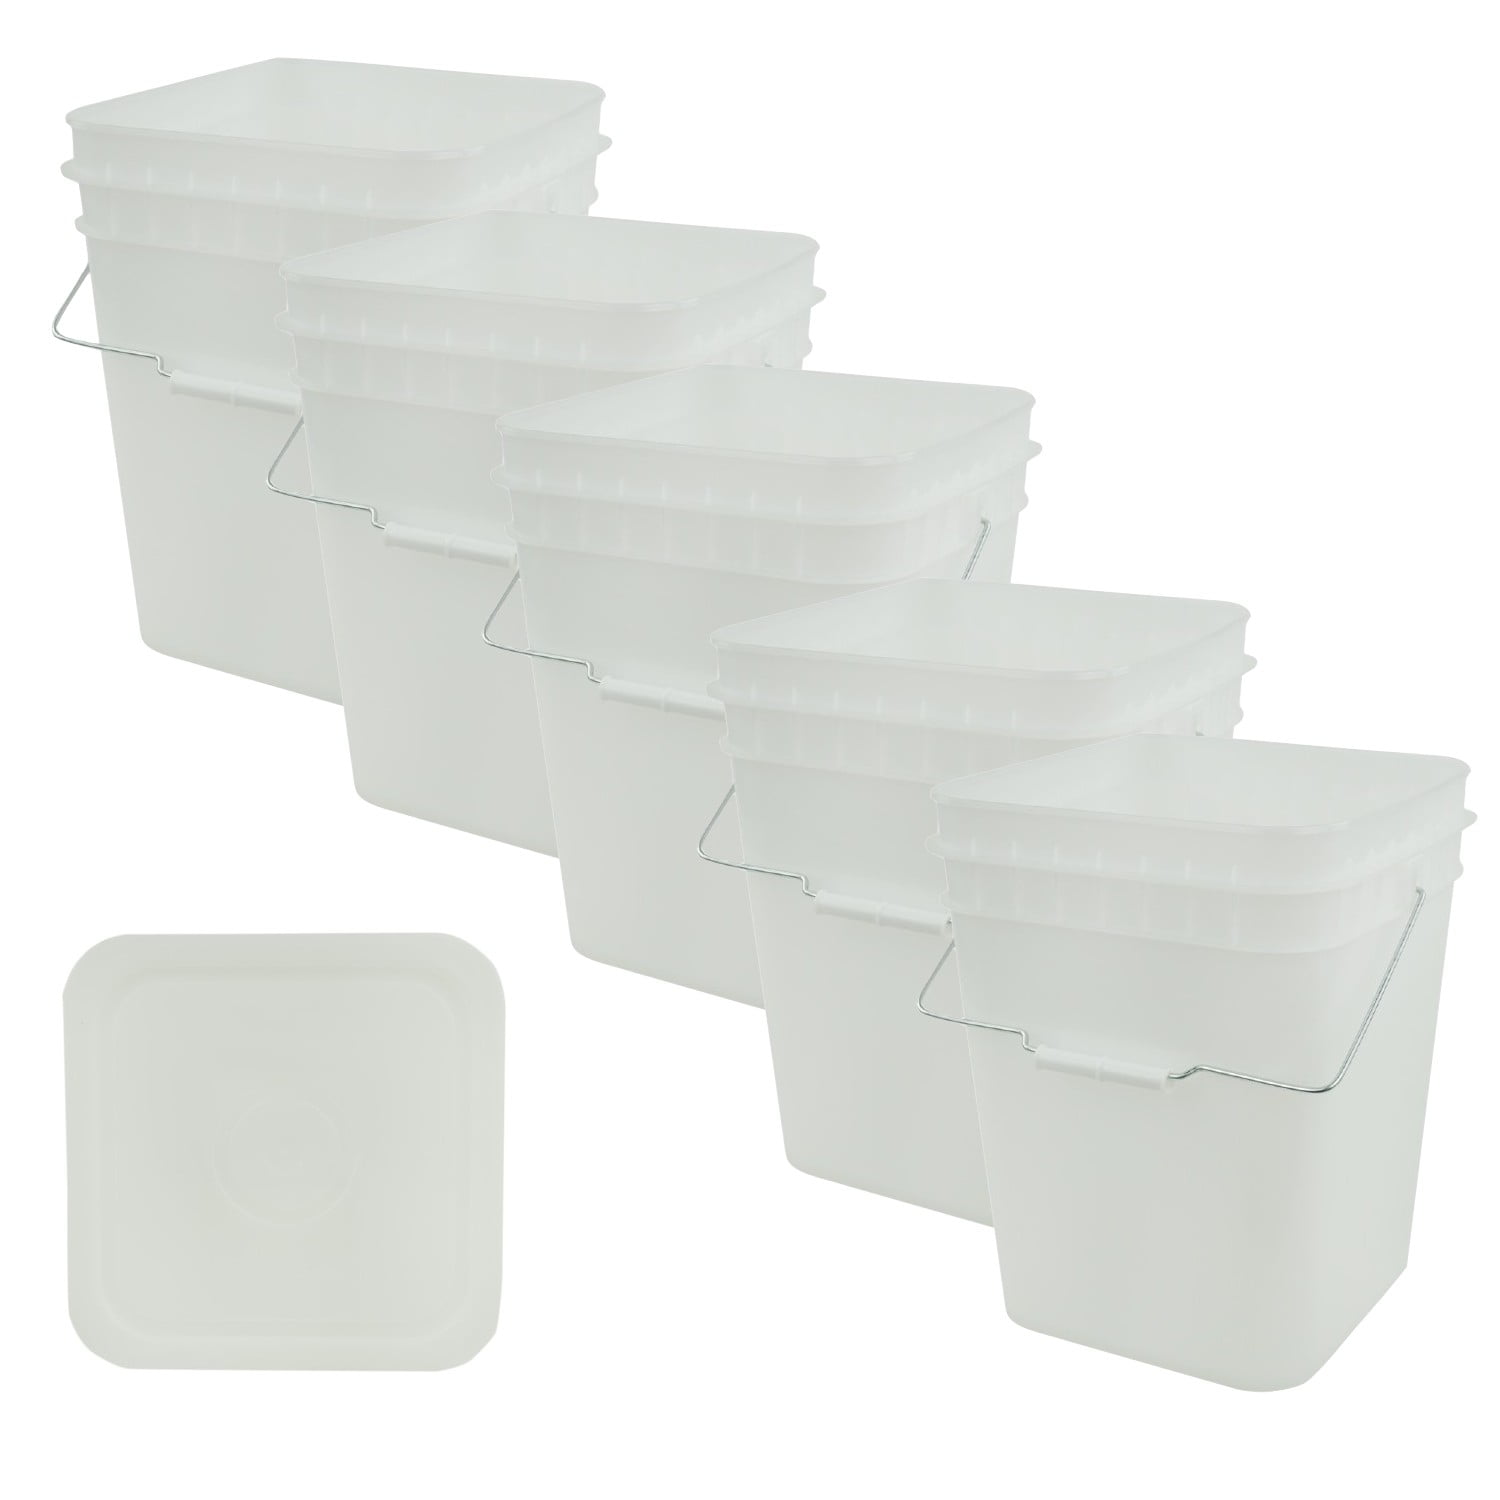 United States Plastic Buckets Tight Fitting Lids Storage 4 Gallon Pack of 5